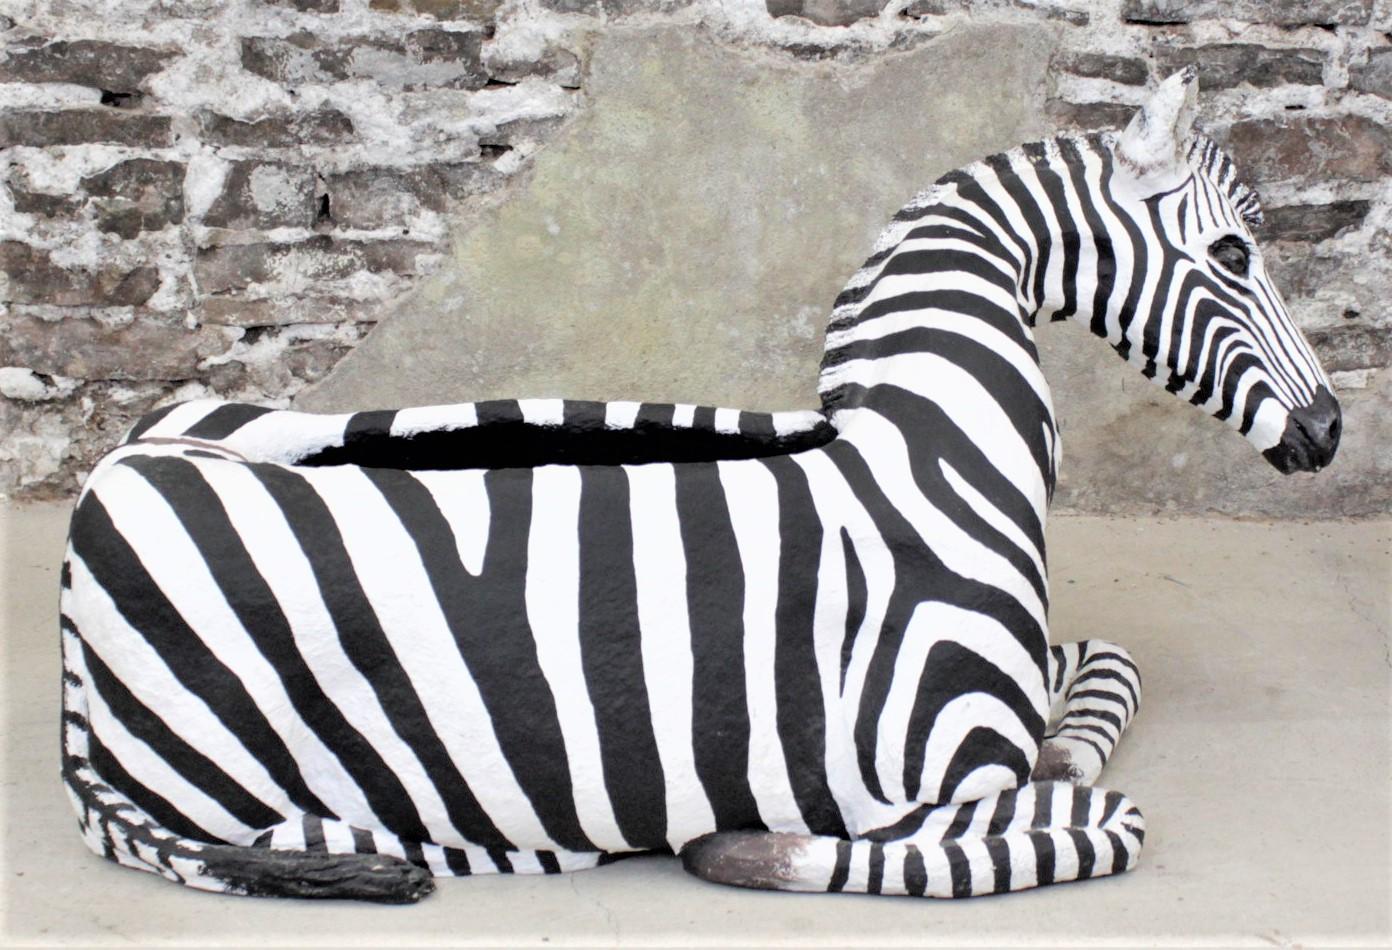 This large and substantial zebra sculpture or planter box was made by Monica Oliver, and unknown artist, in 1990 in a modern realistic style. The sculpture appears to be composed of various materials such as paper mache, fiberglass and resin and